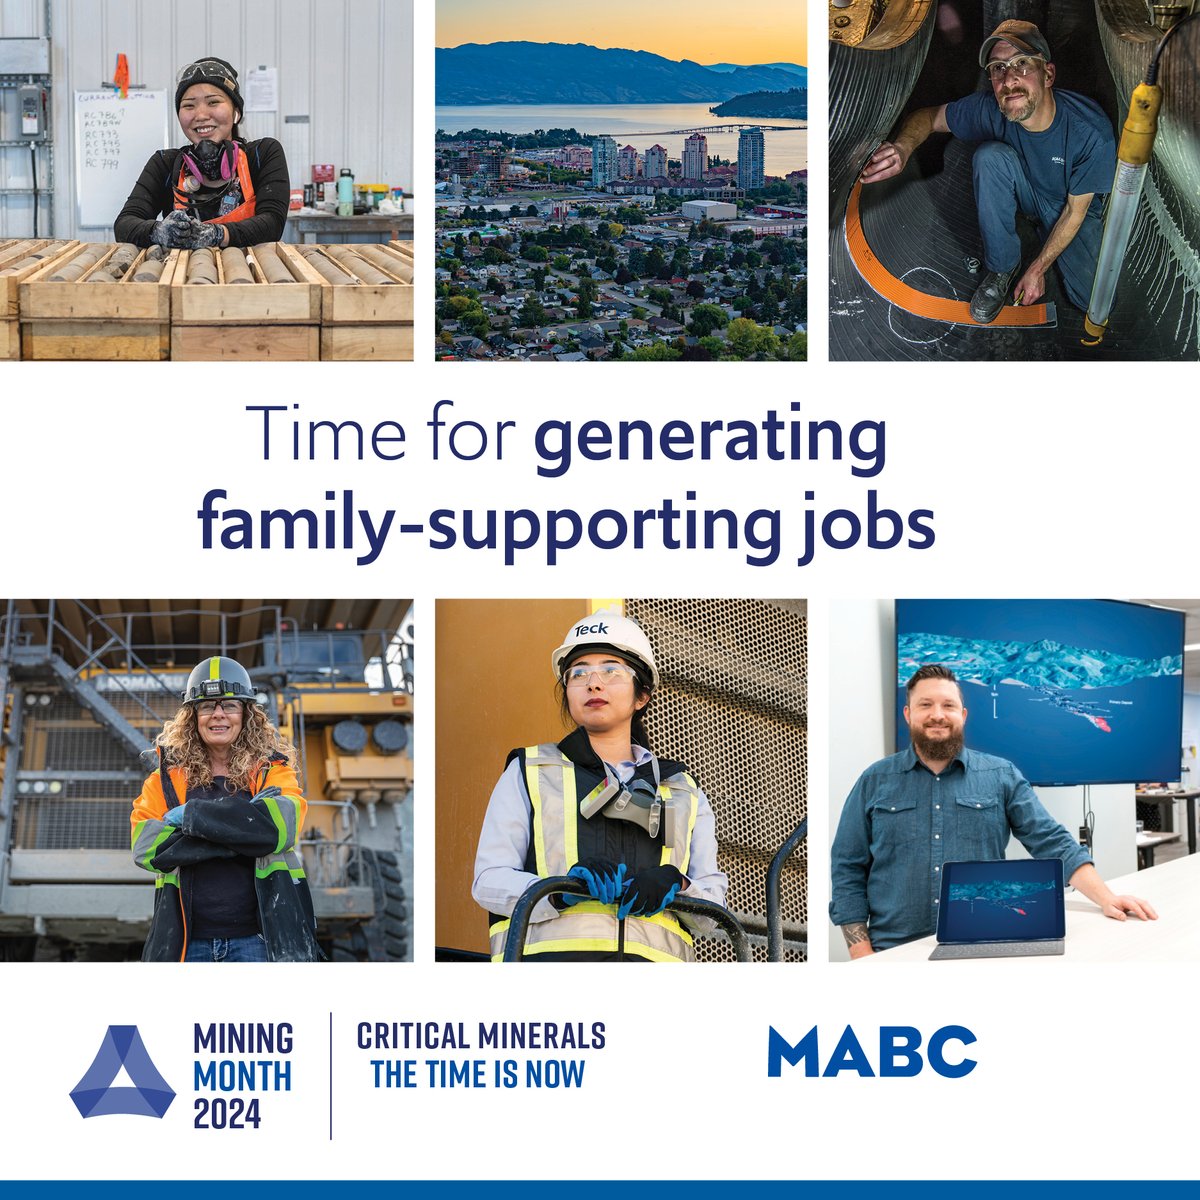 #MiningMonth – The Time Is Now For Creating Family Supporting Jobs

#DYK that BC’s mining sector supports over 35k direct/indirect jobs?

The average annual salary is over $139k (one of the highest in BC), BC mine/smelter job supports 2 jobs in mining supply & services sector.